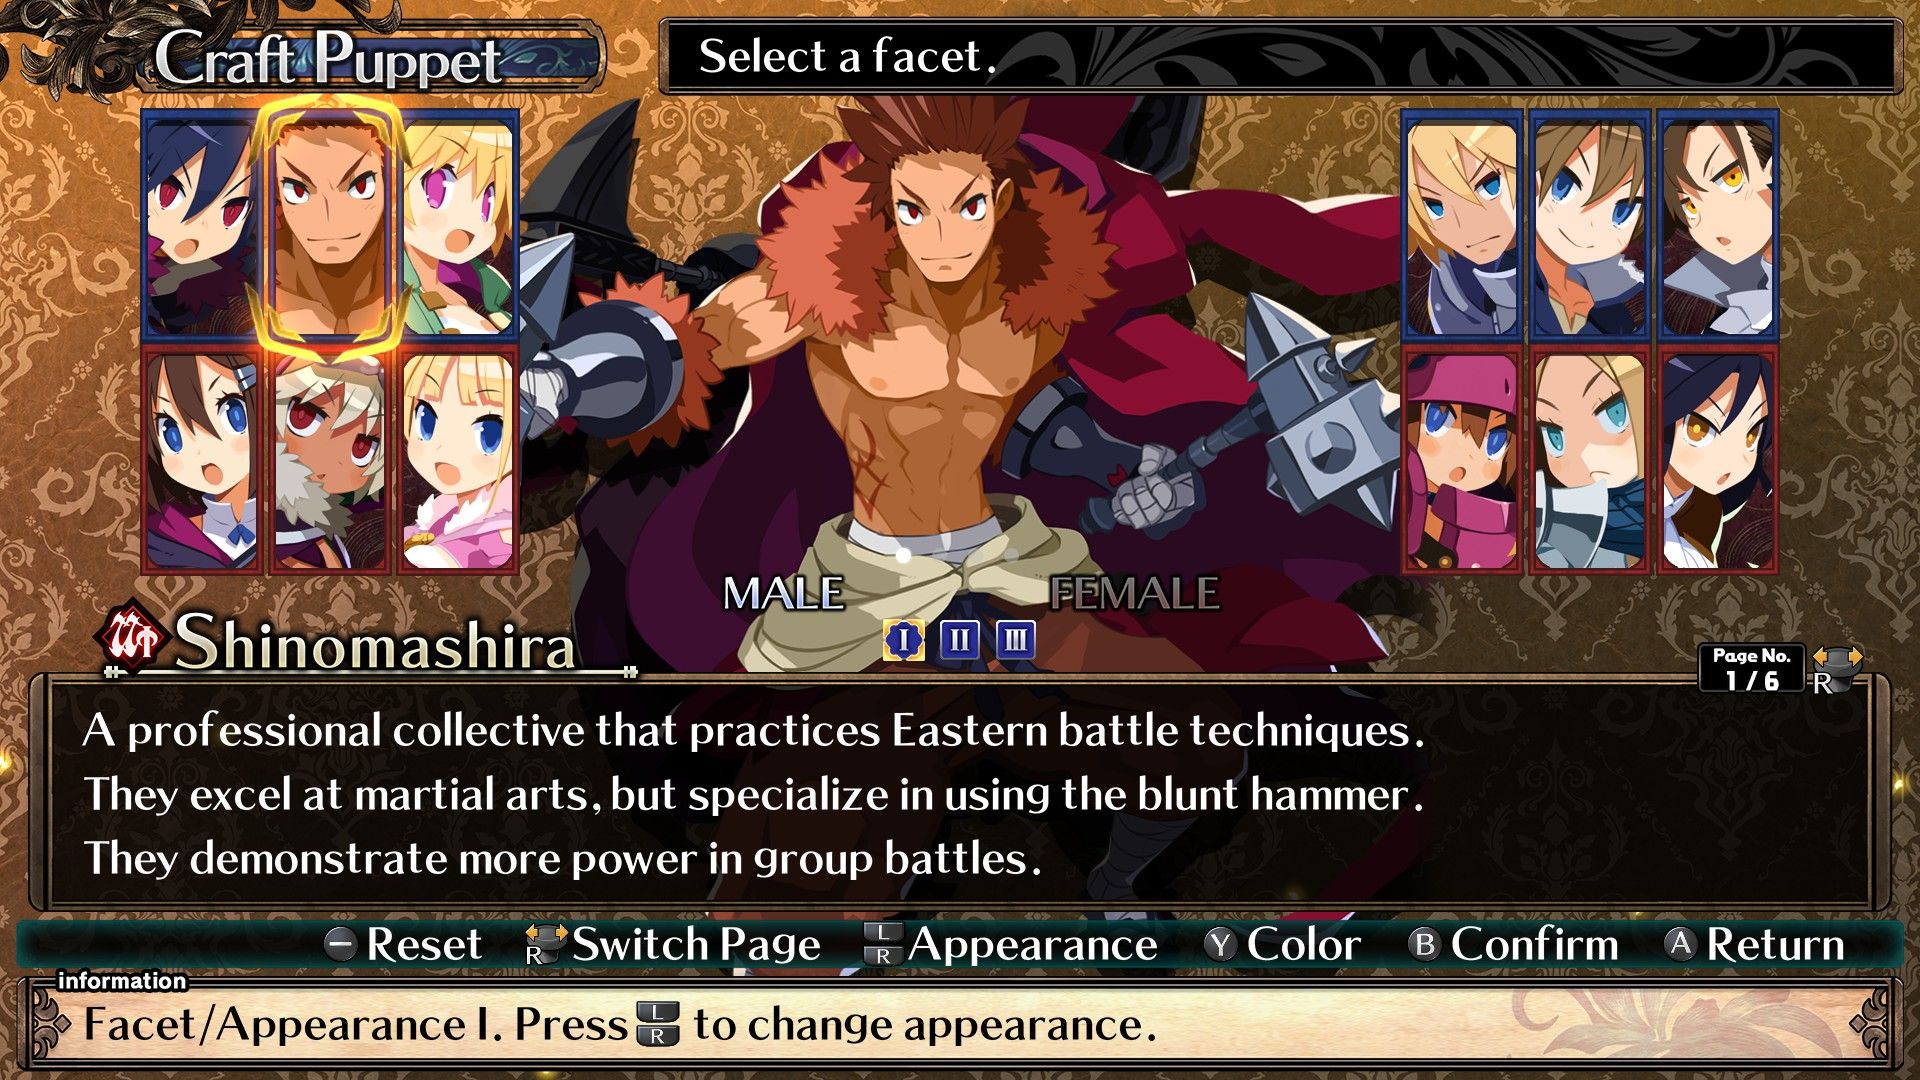 Labyrinth Of Galleria: The Moon Society Shinomashira character creation screen showing the male character and class description.